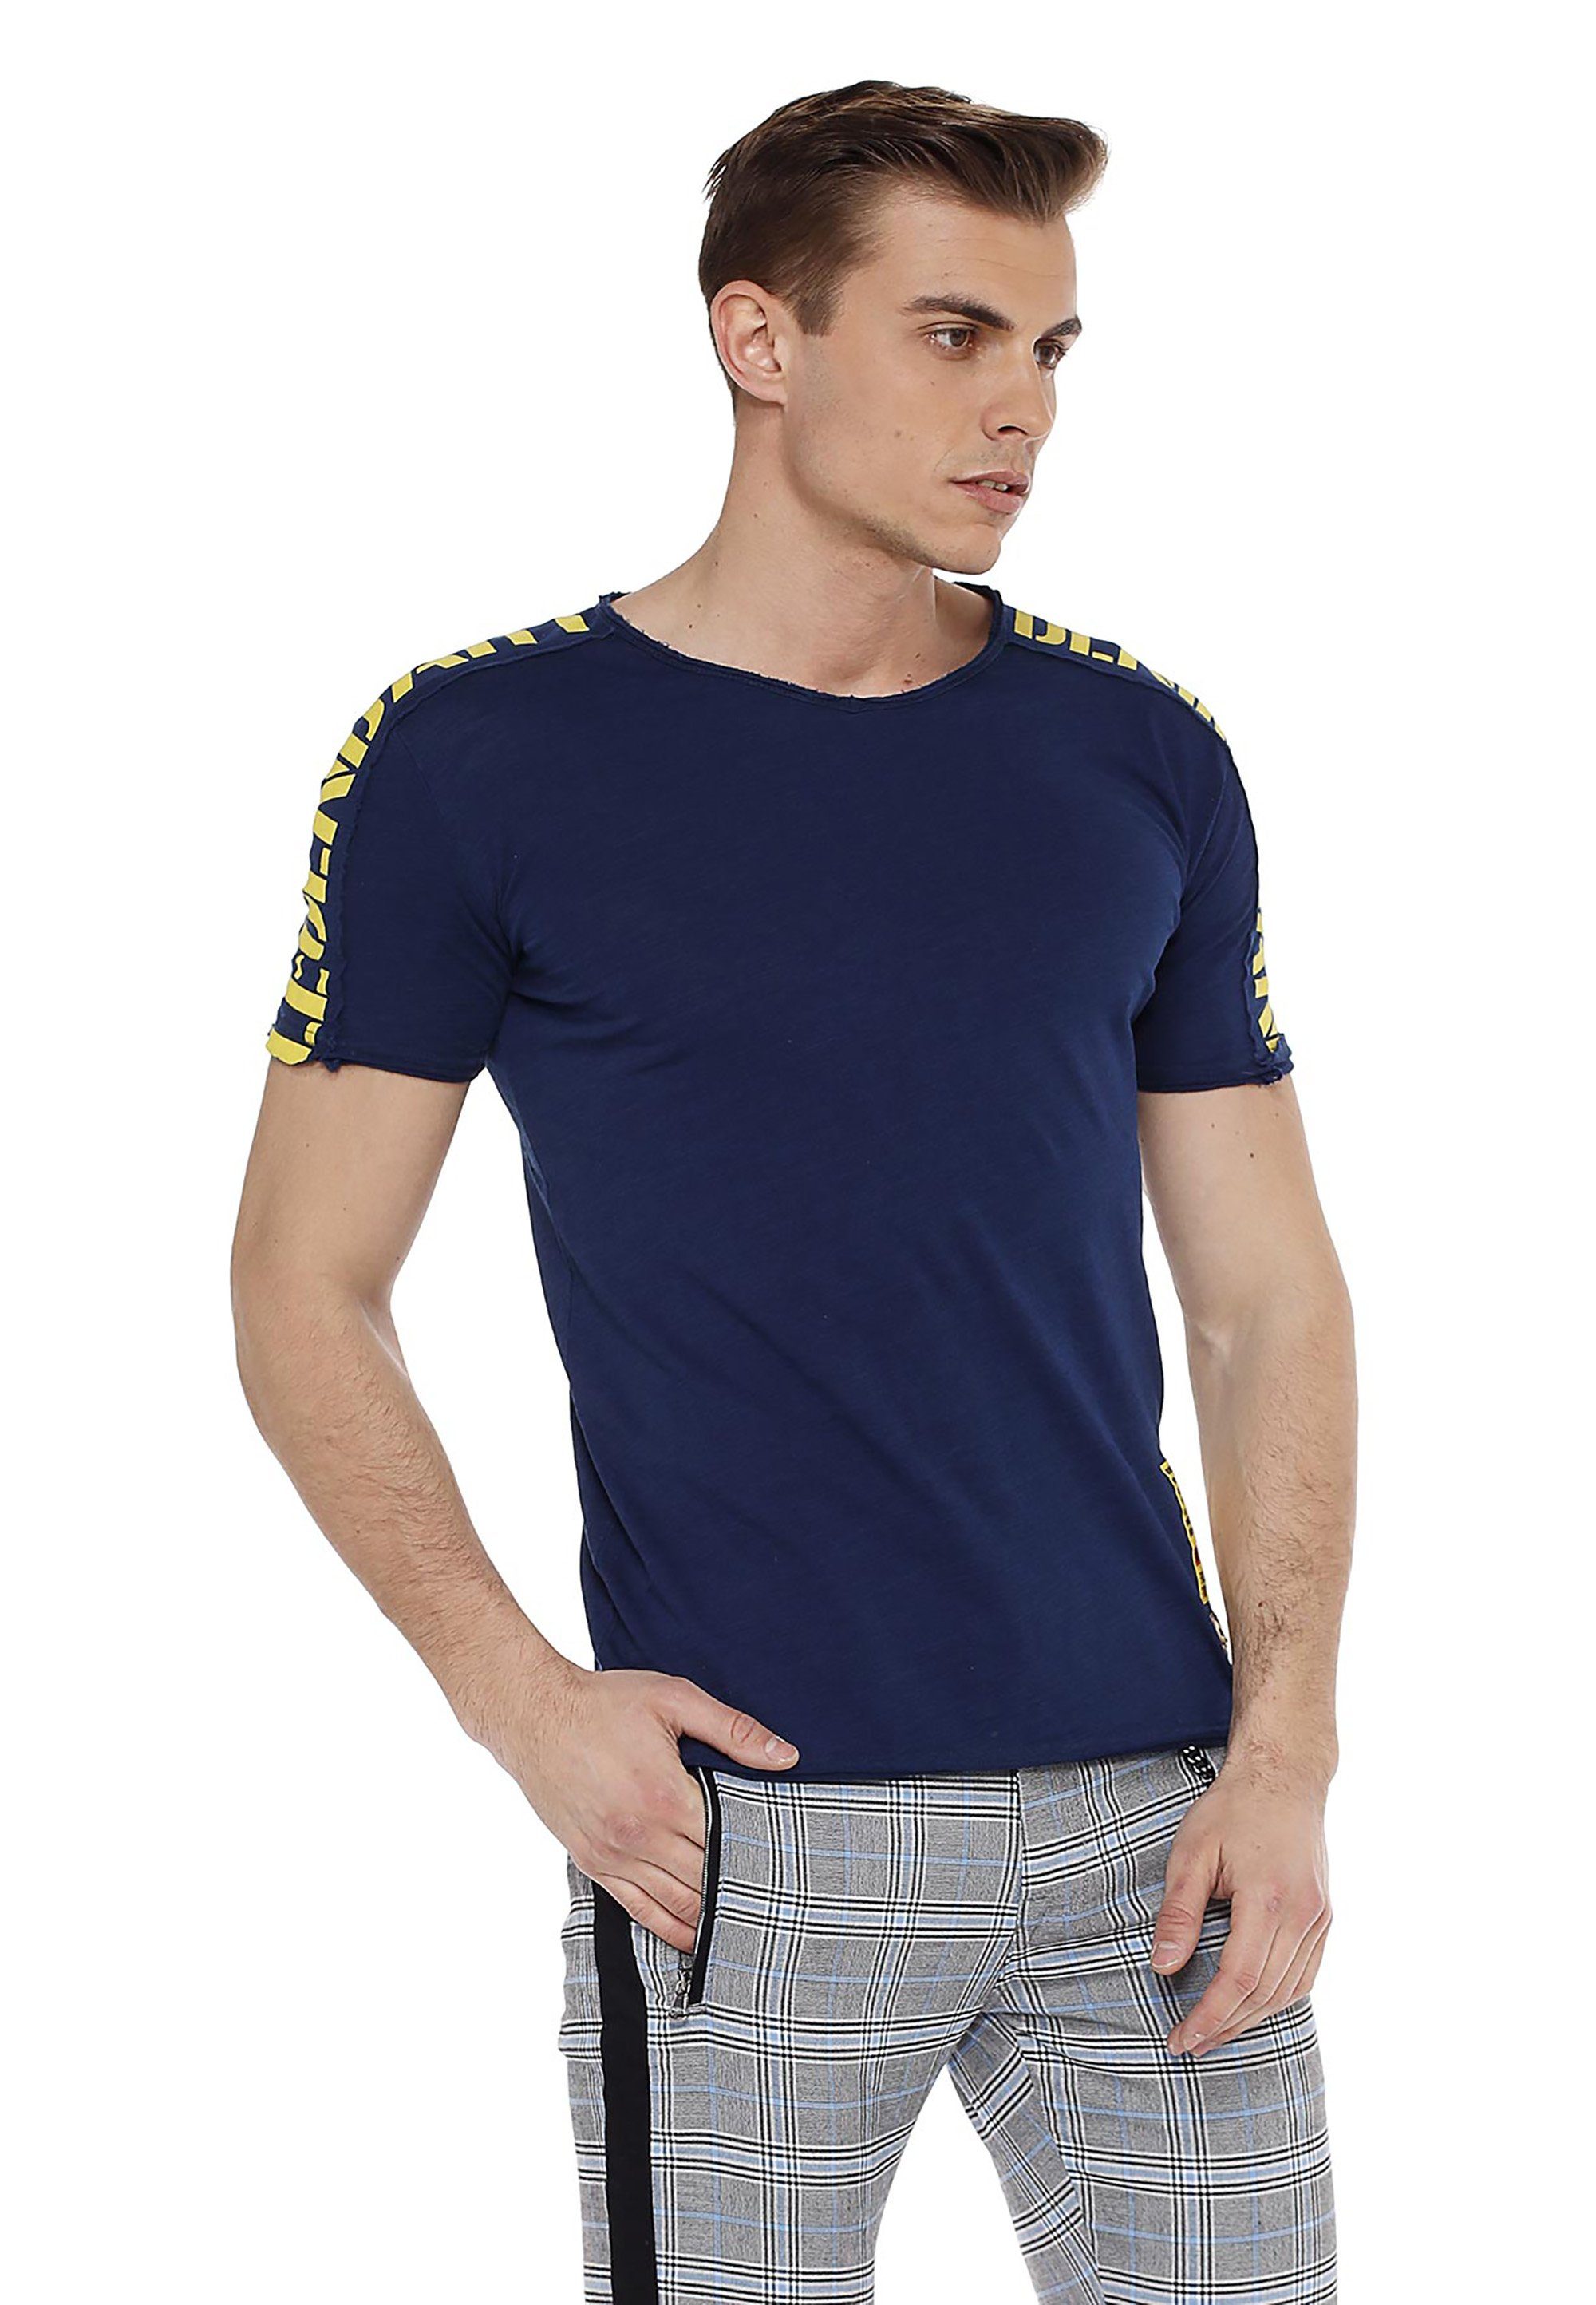 & Baxx Relaxed-Fit im Cipo T-Shirt